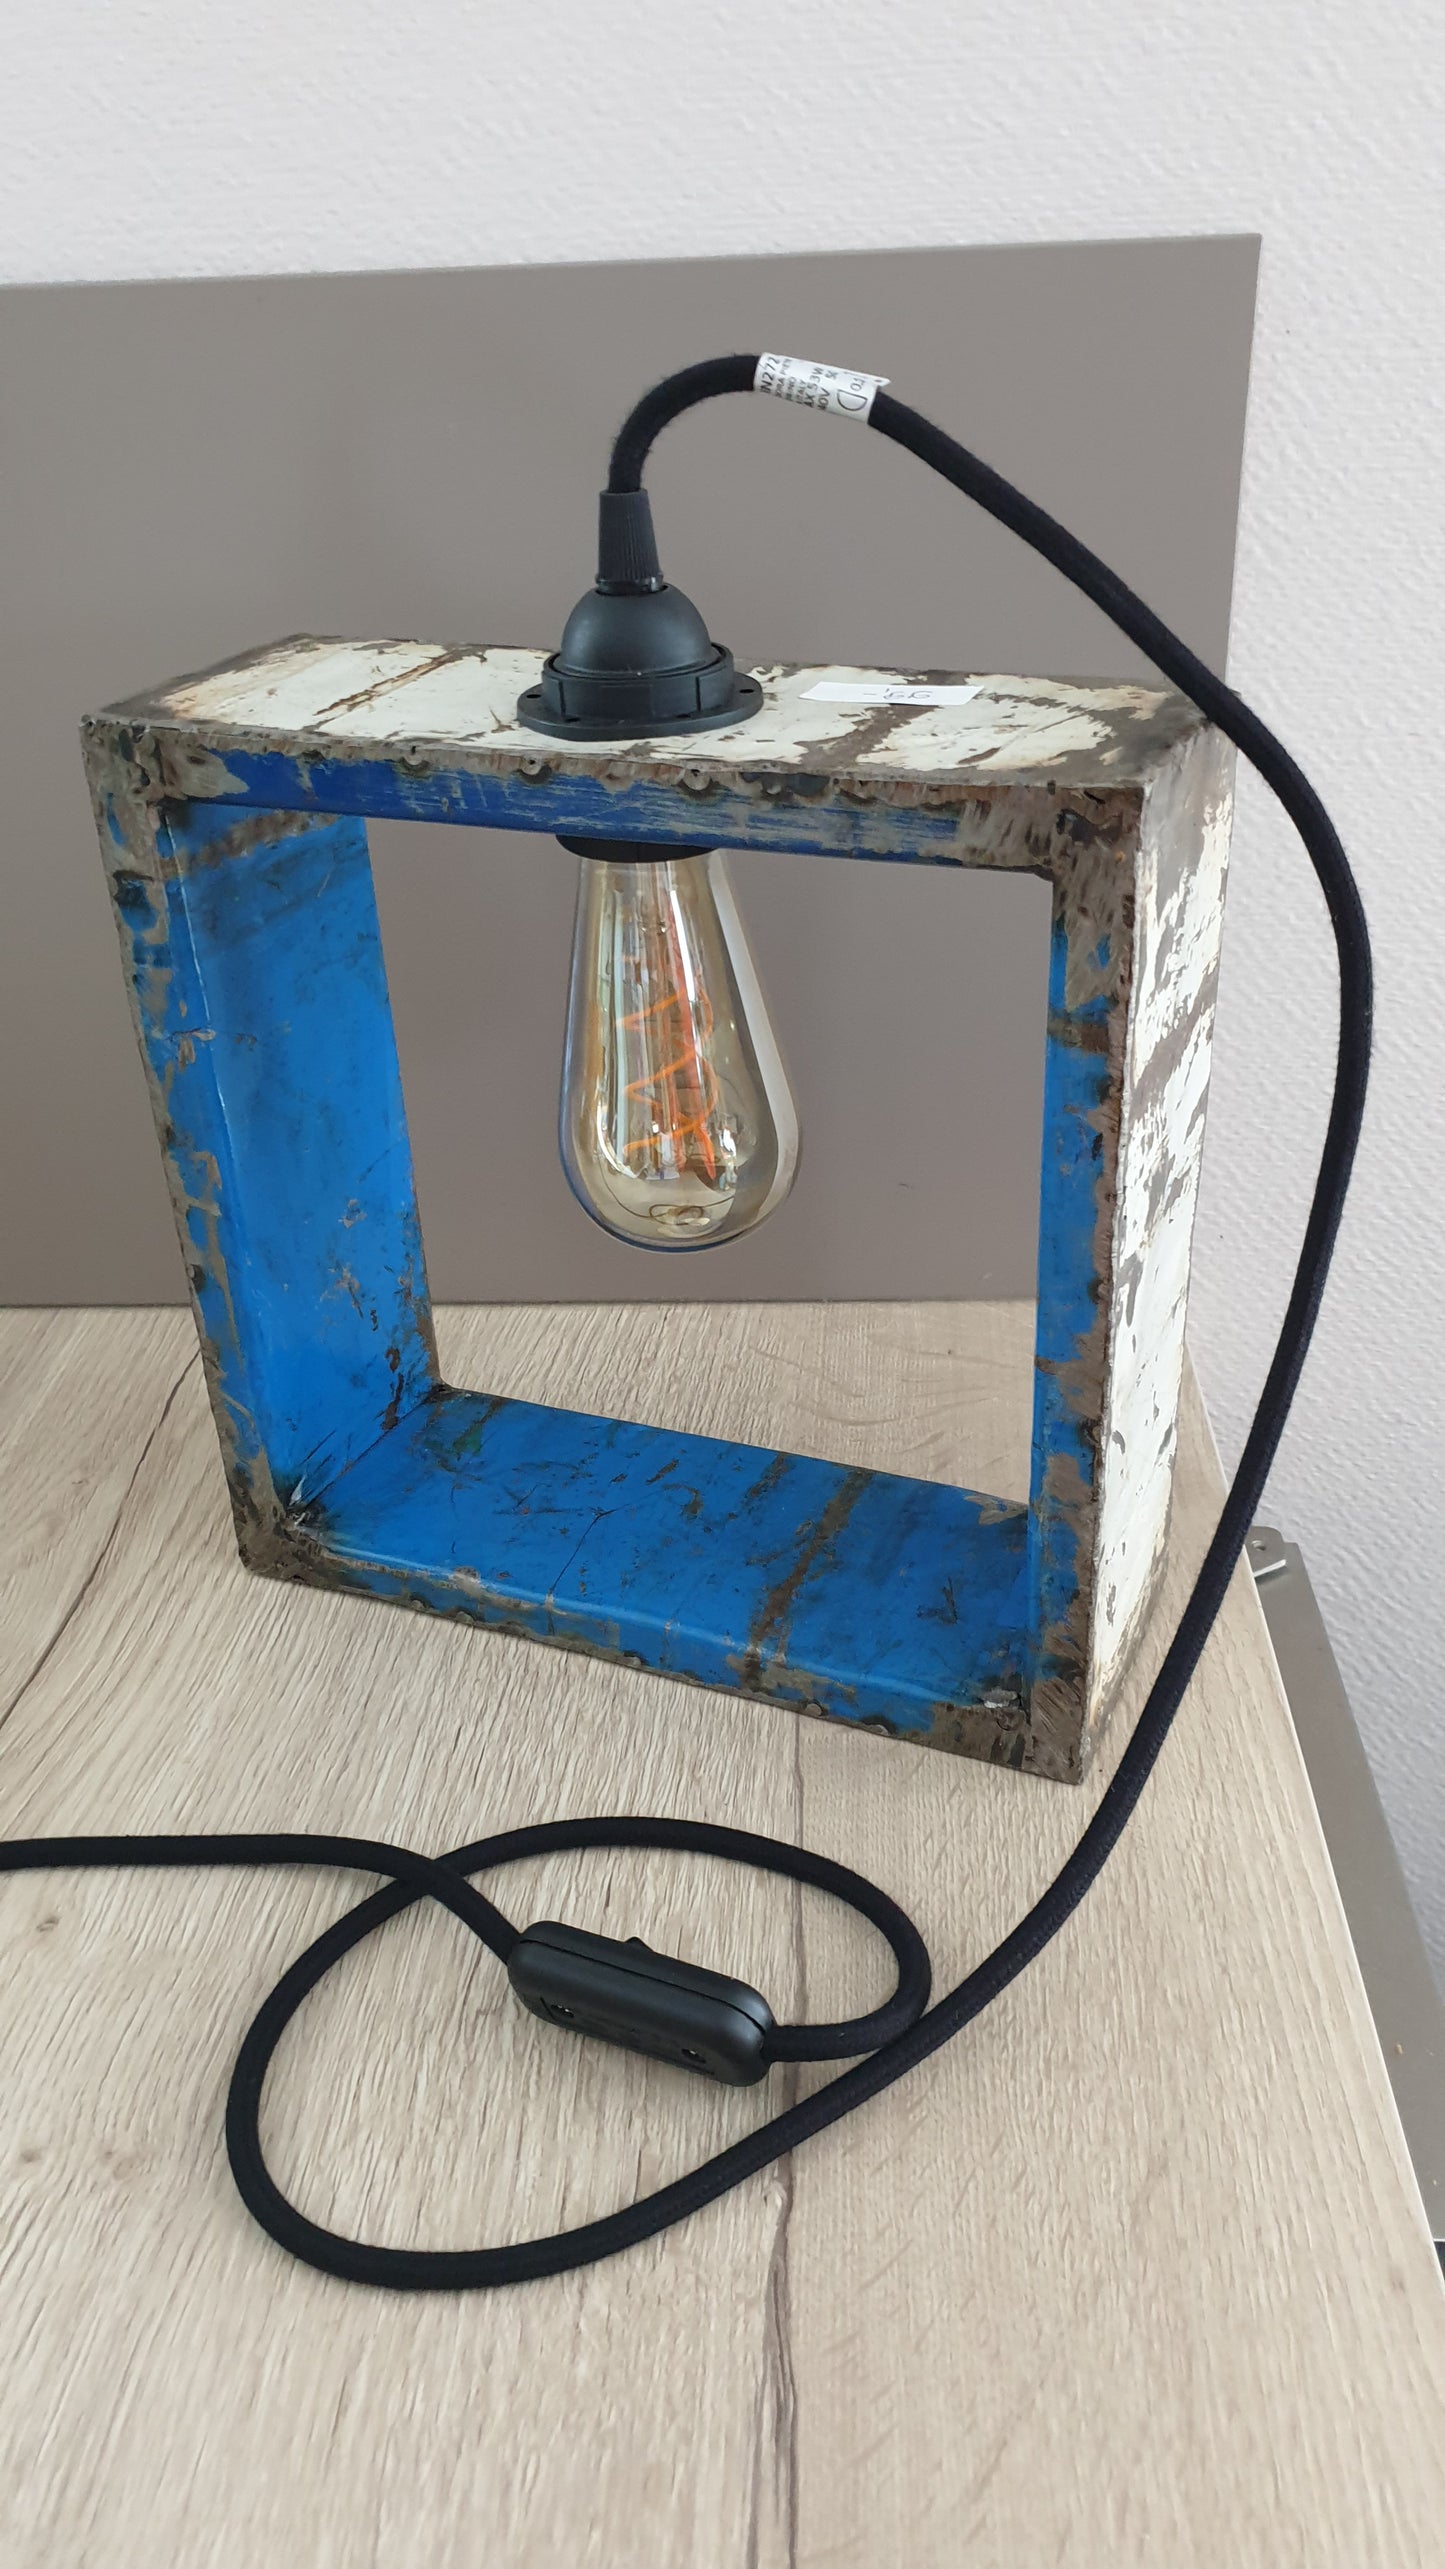 Large recycled lamp with bulb